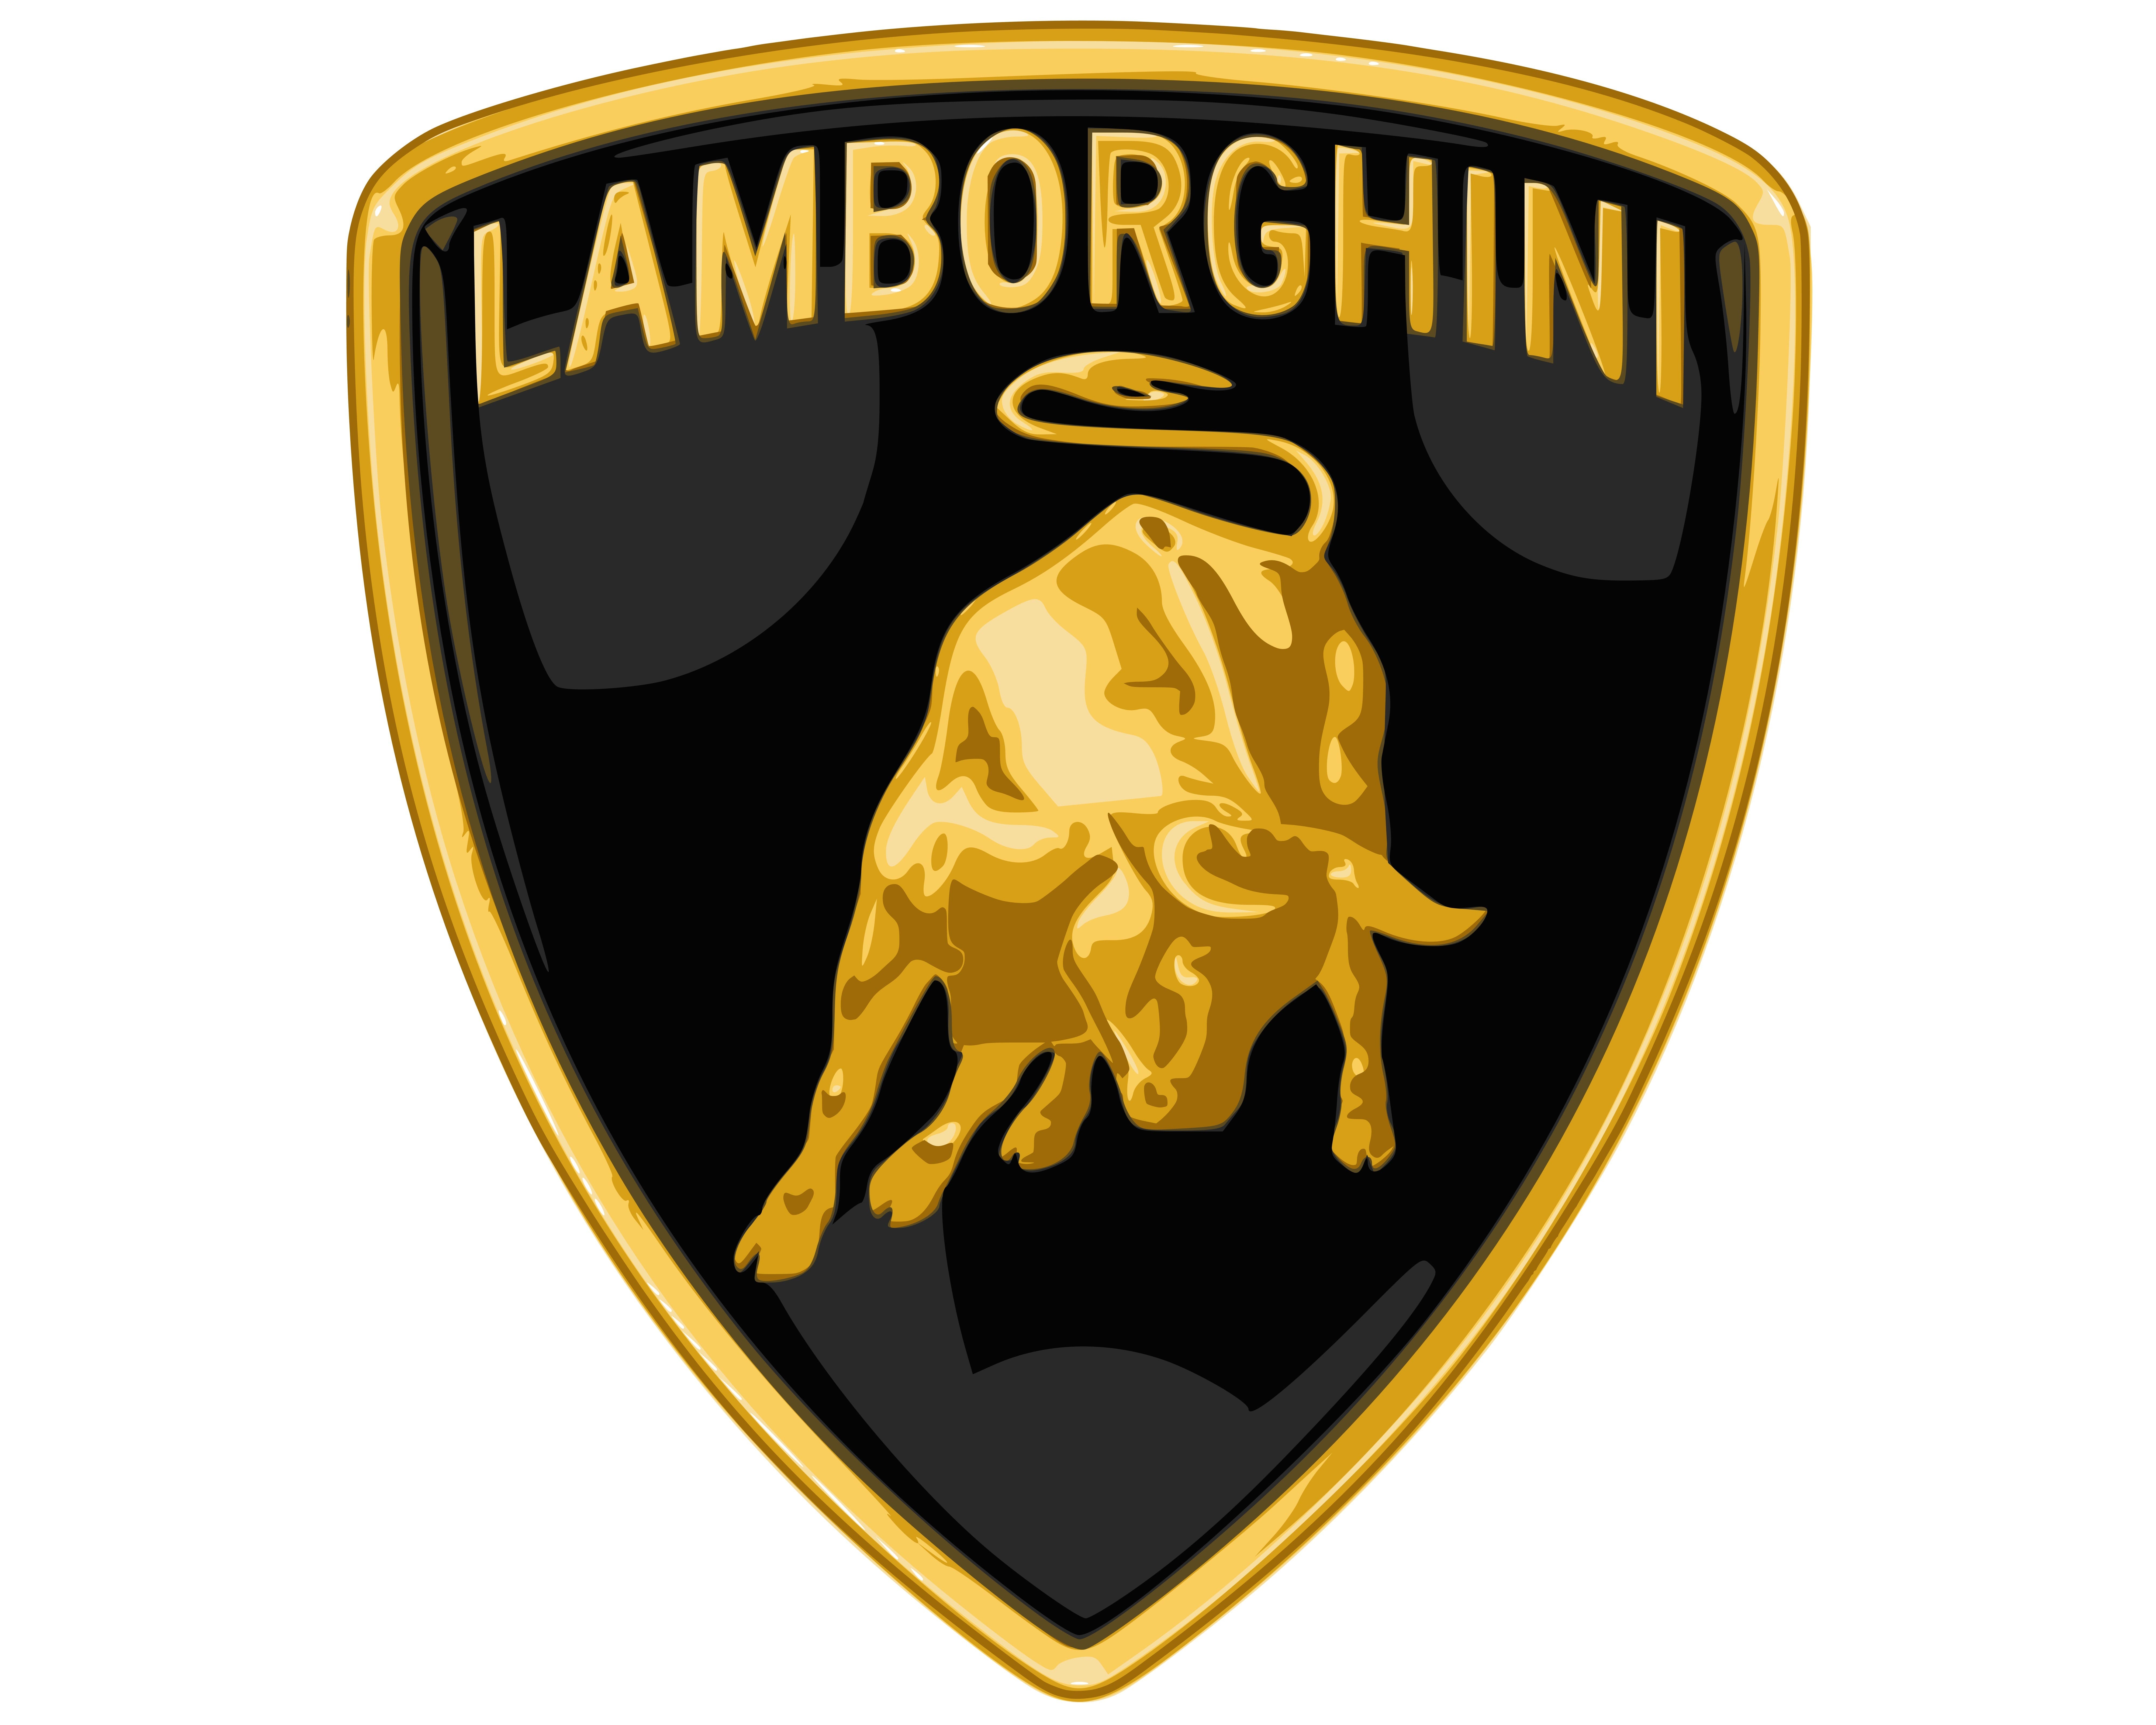 Lamborghini Logo and symbol, meaning, history, PNG, brand